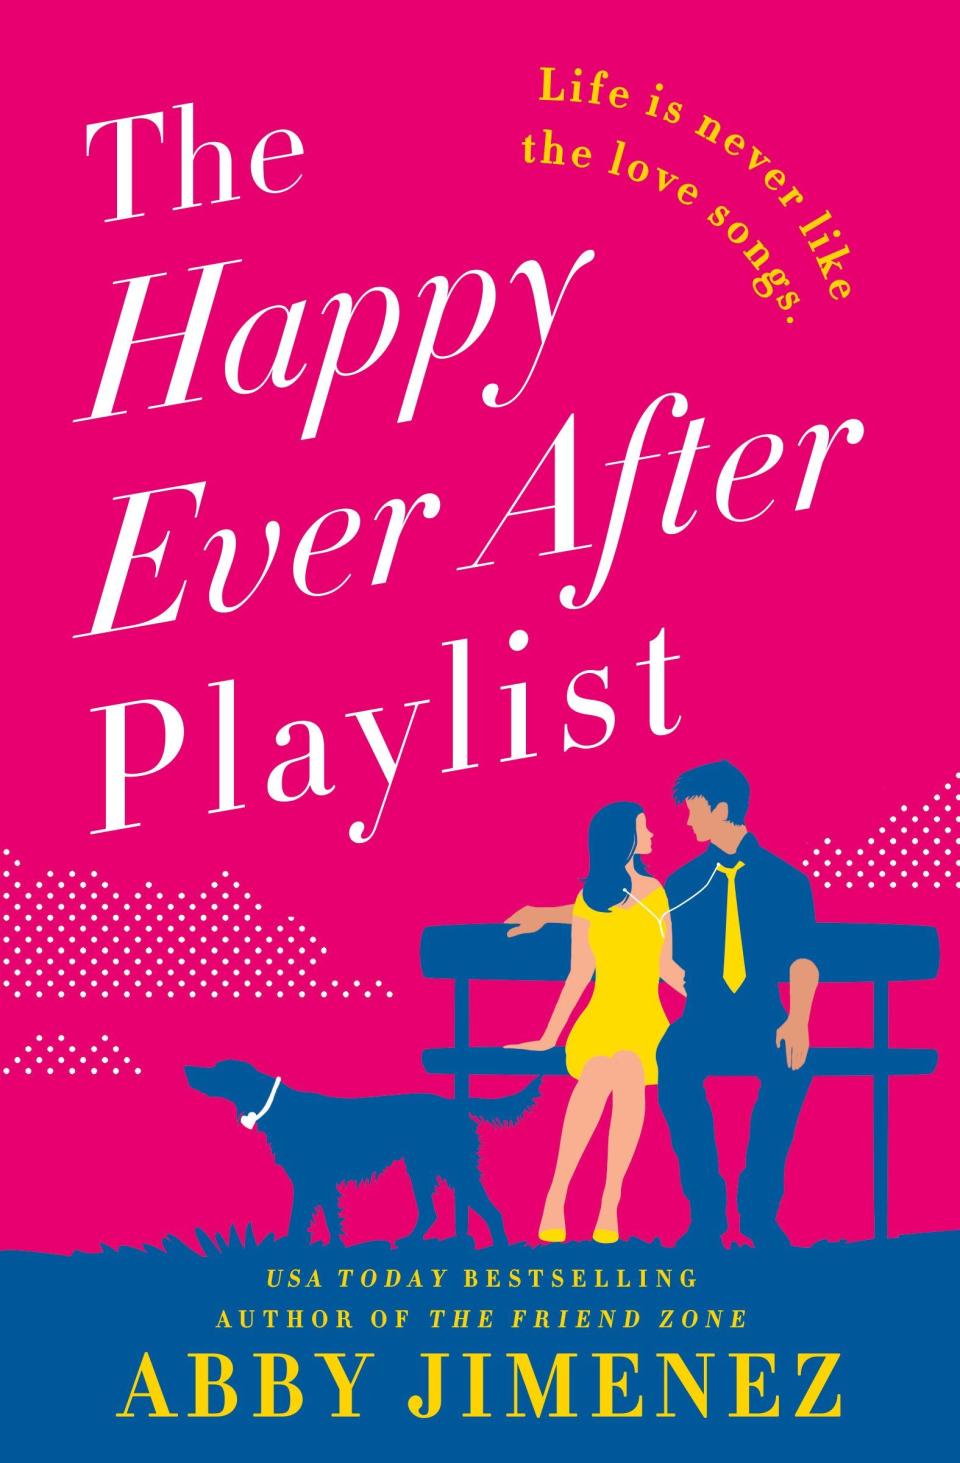 34) ‘The Happy Ever After Playlist’ by Abby Jimenez